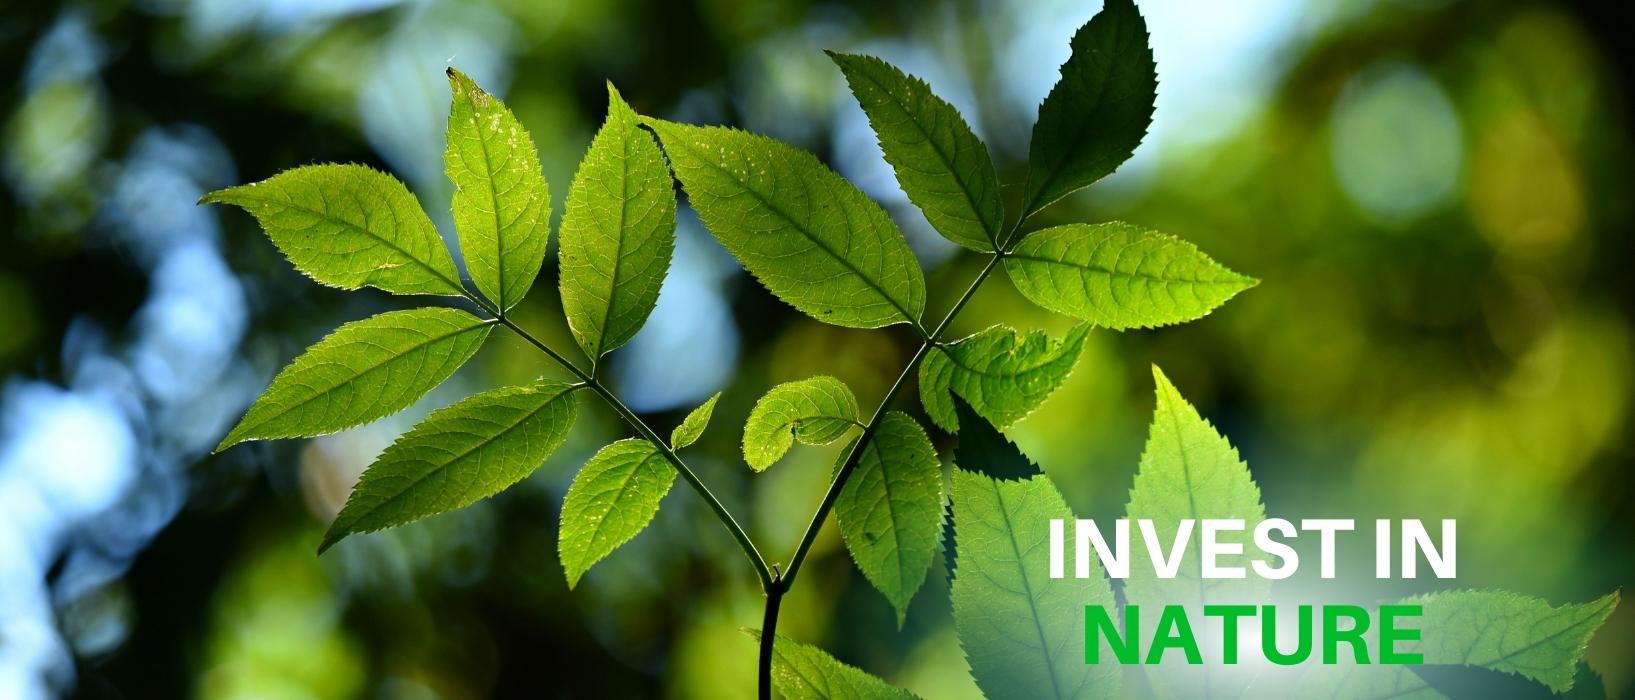 invest in nature written over leaves